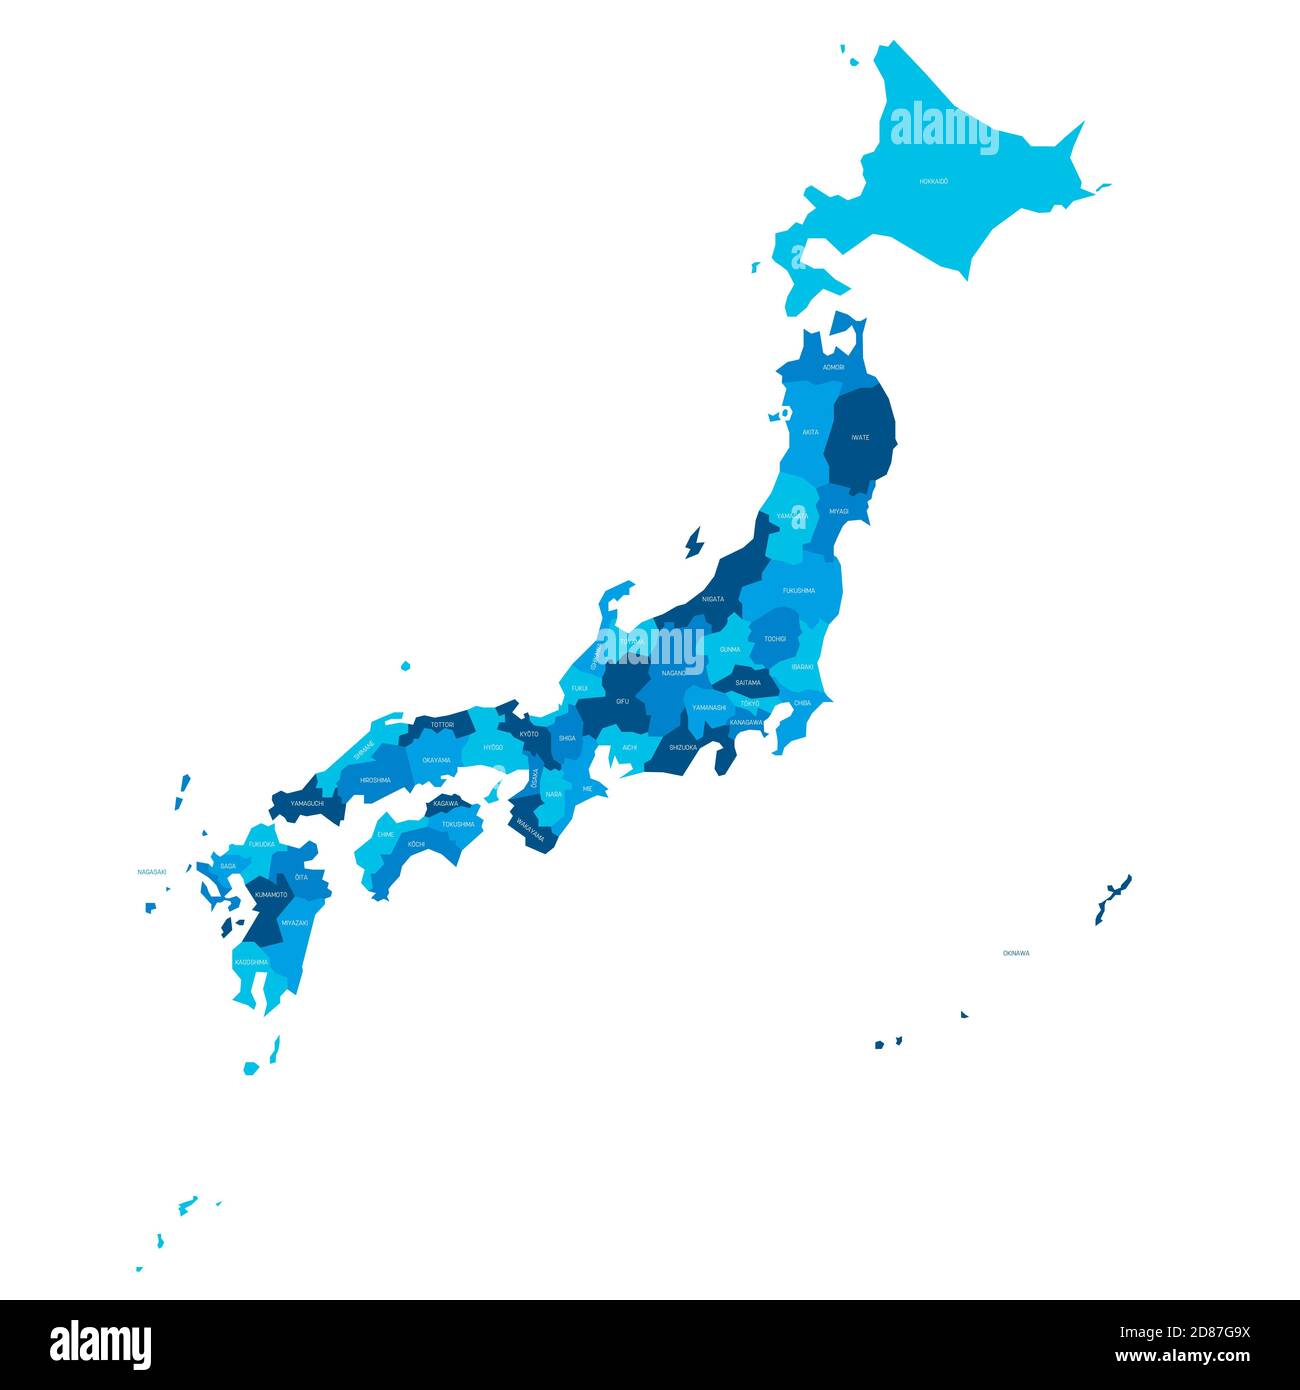 Blue political map of Japan. Administrative divisions - prefectures. Simple flat vector map with labels. Stock Vector